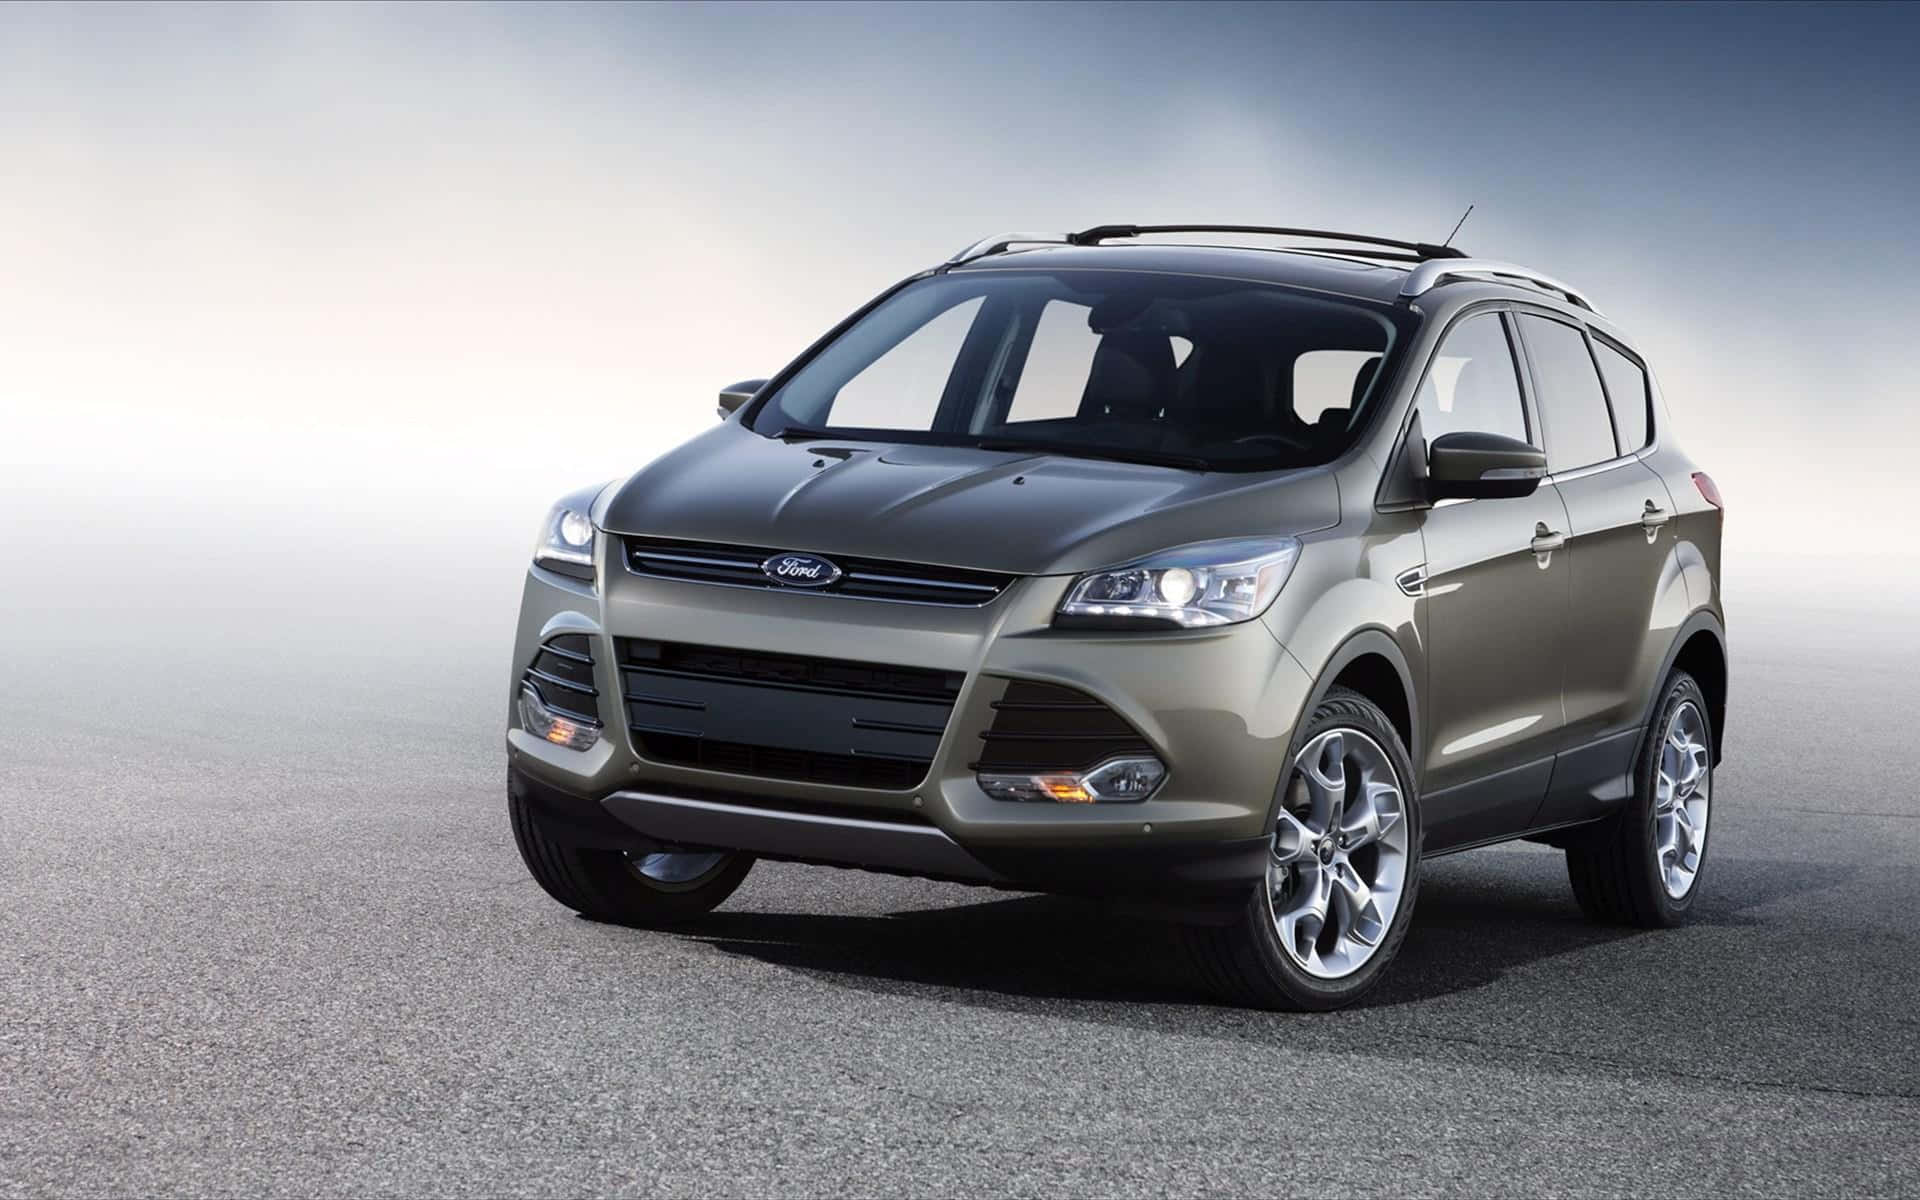 Sleek and Sporty Ford Escape Wallpaper